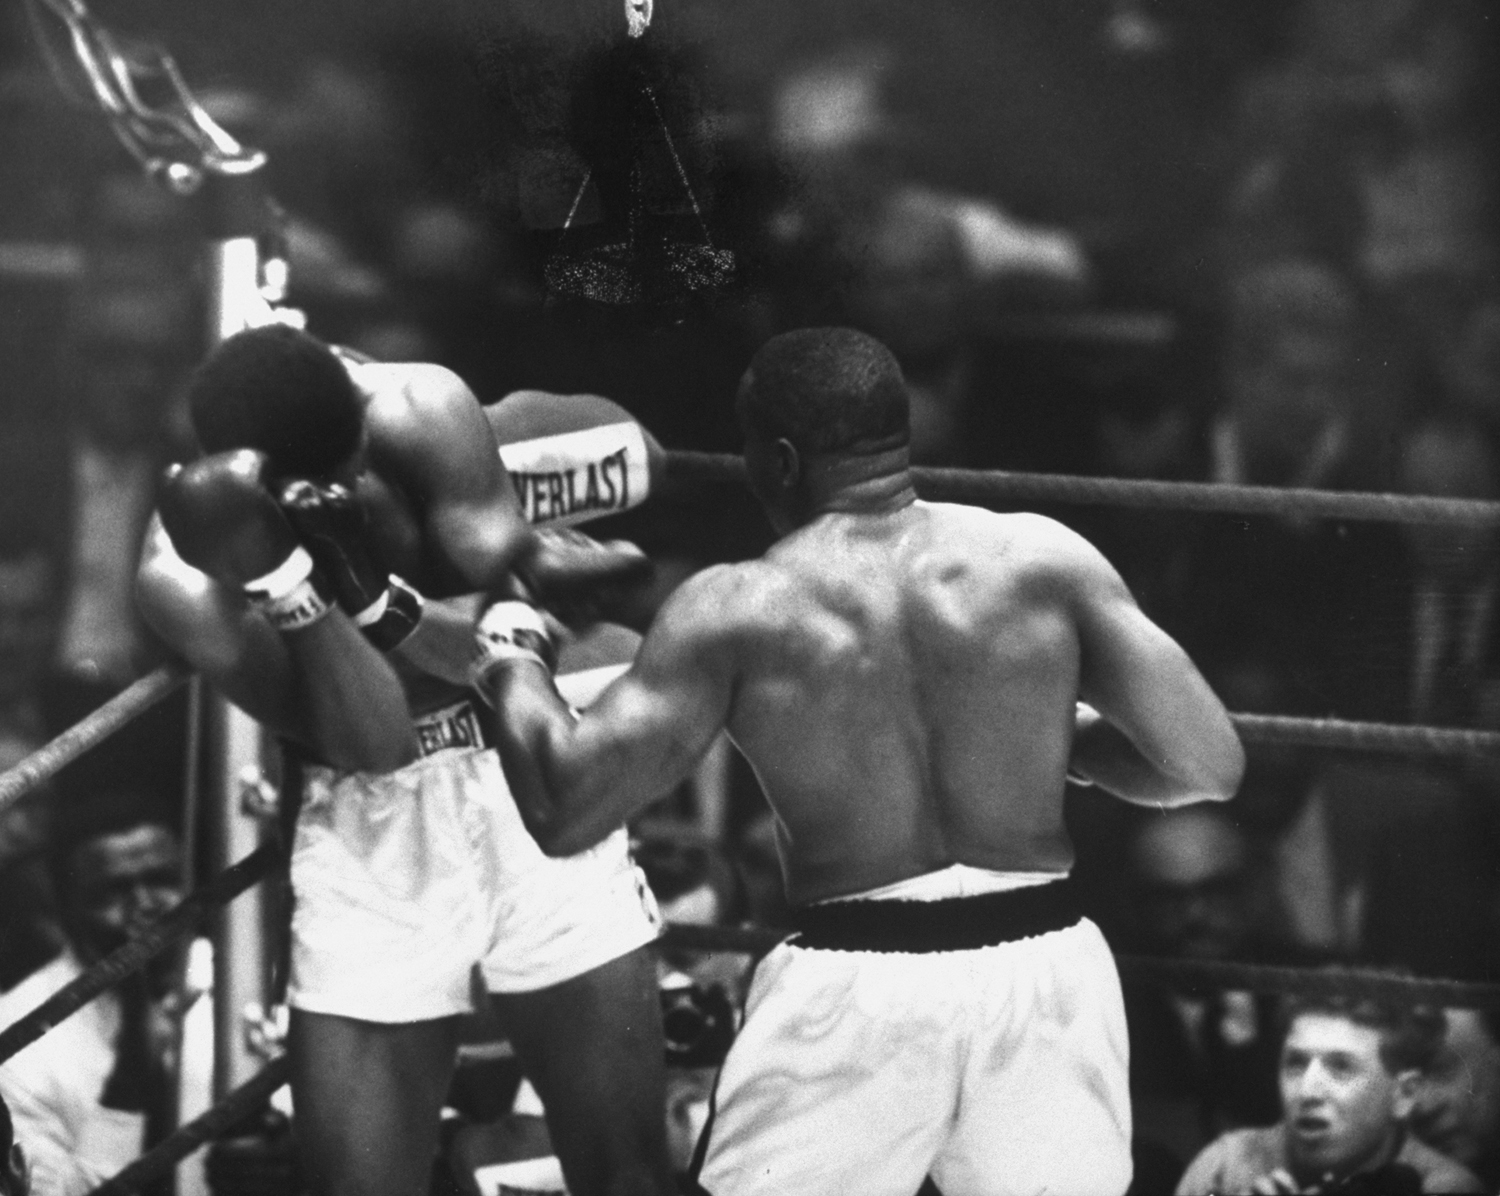 Action from the first Clay-Liston heavyweight title fight, Feb. 1964.